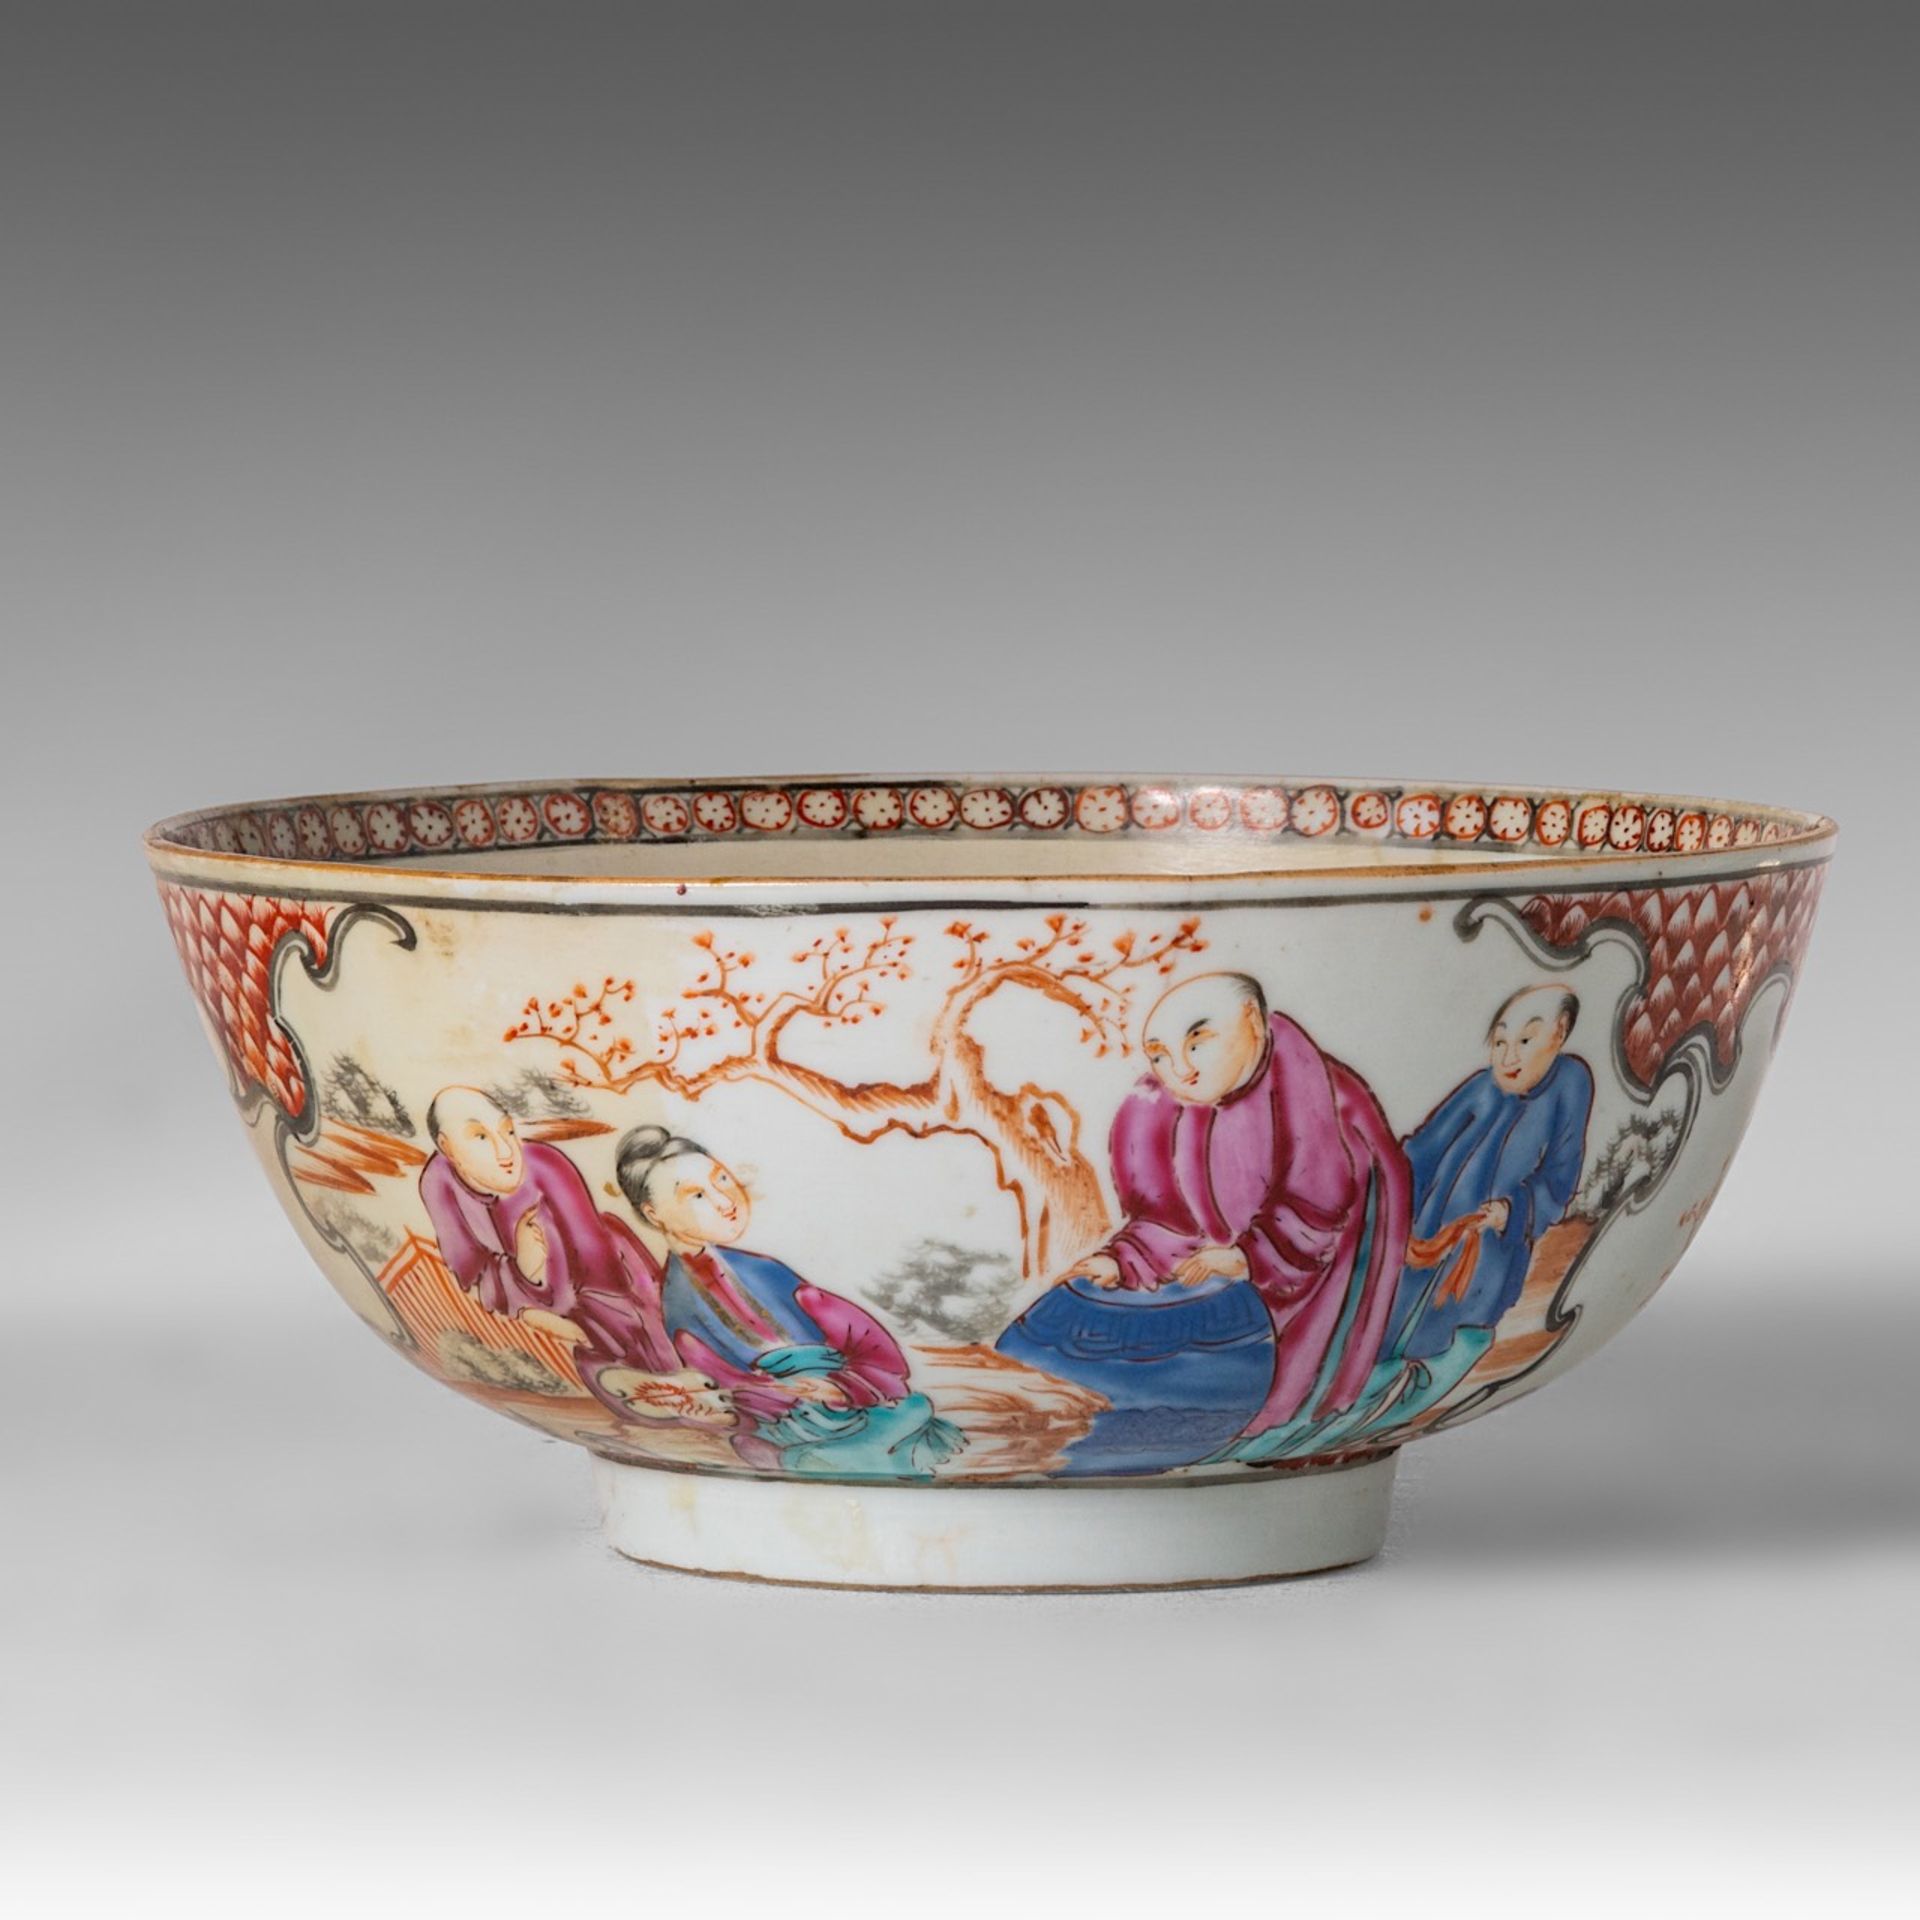 A small collection of Chinese famille rose and Imari export porcelain tea ware, 18thC, largest H 9 - - Image 10 of 17